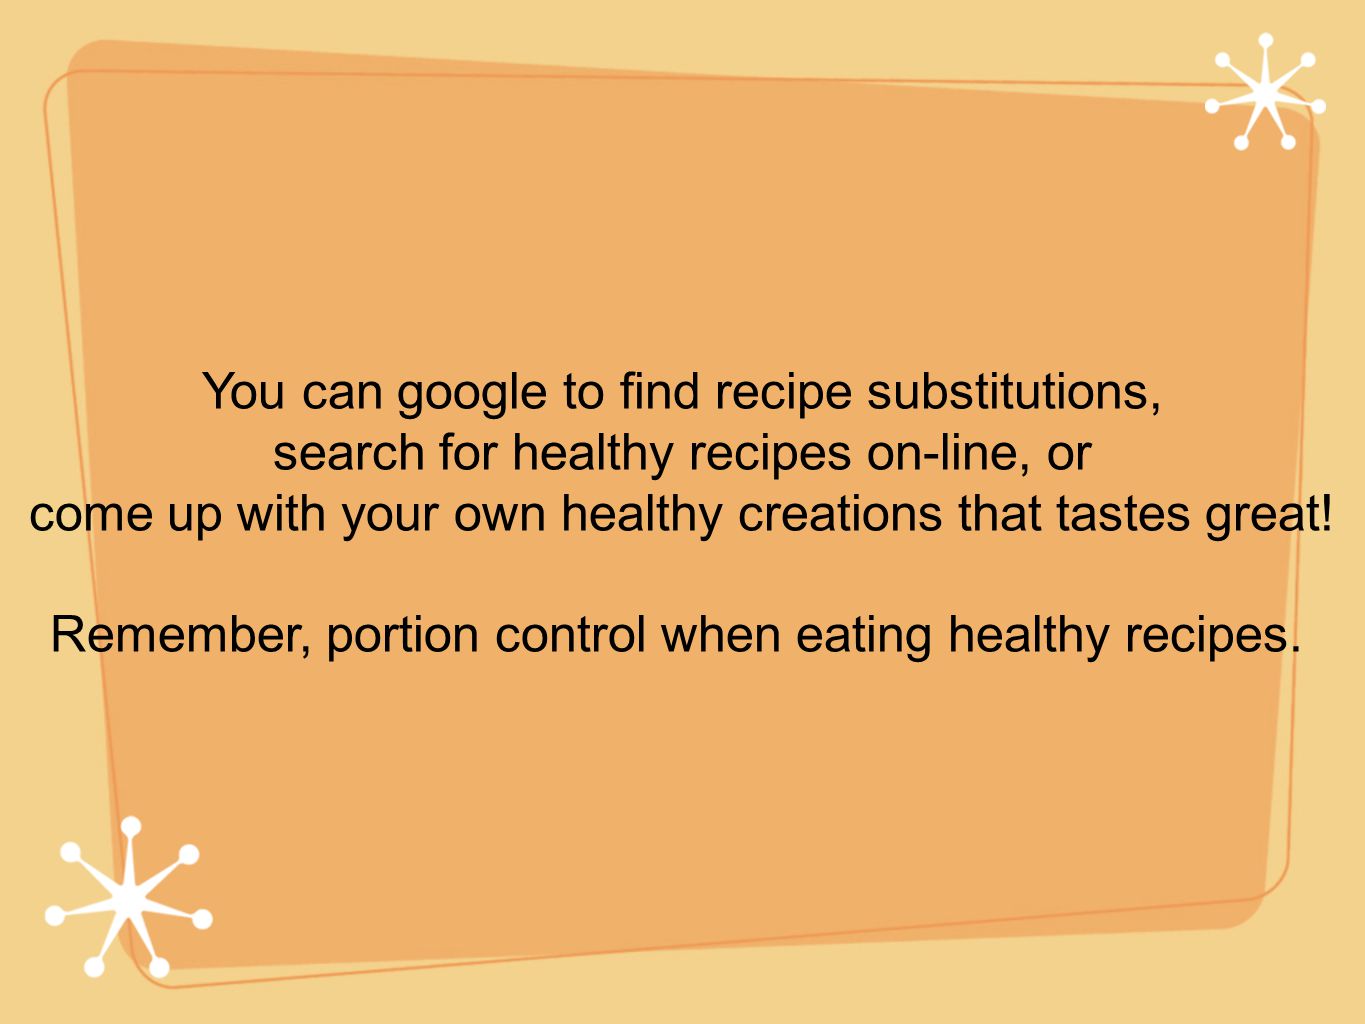 You can google to find recipe substitutions, search for healthy recipes on-line, or come up with your own healthy creations that tastes great.